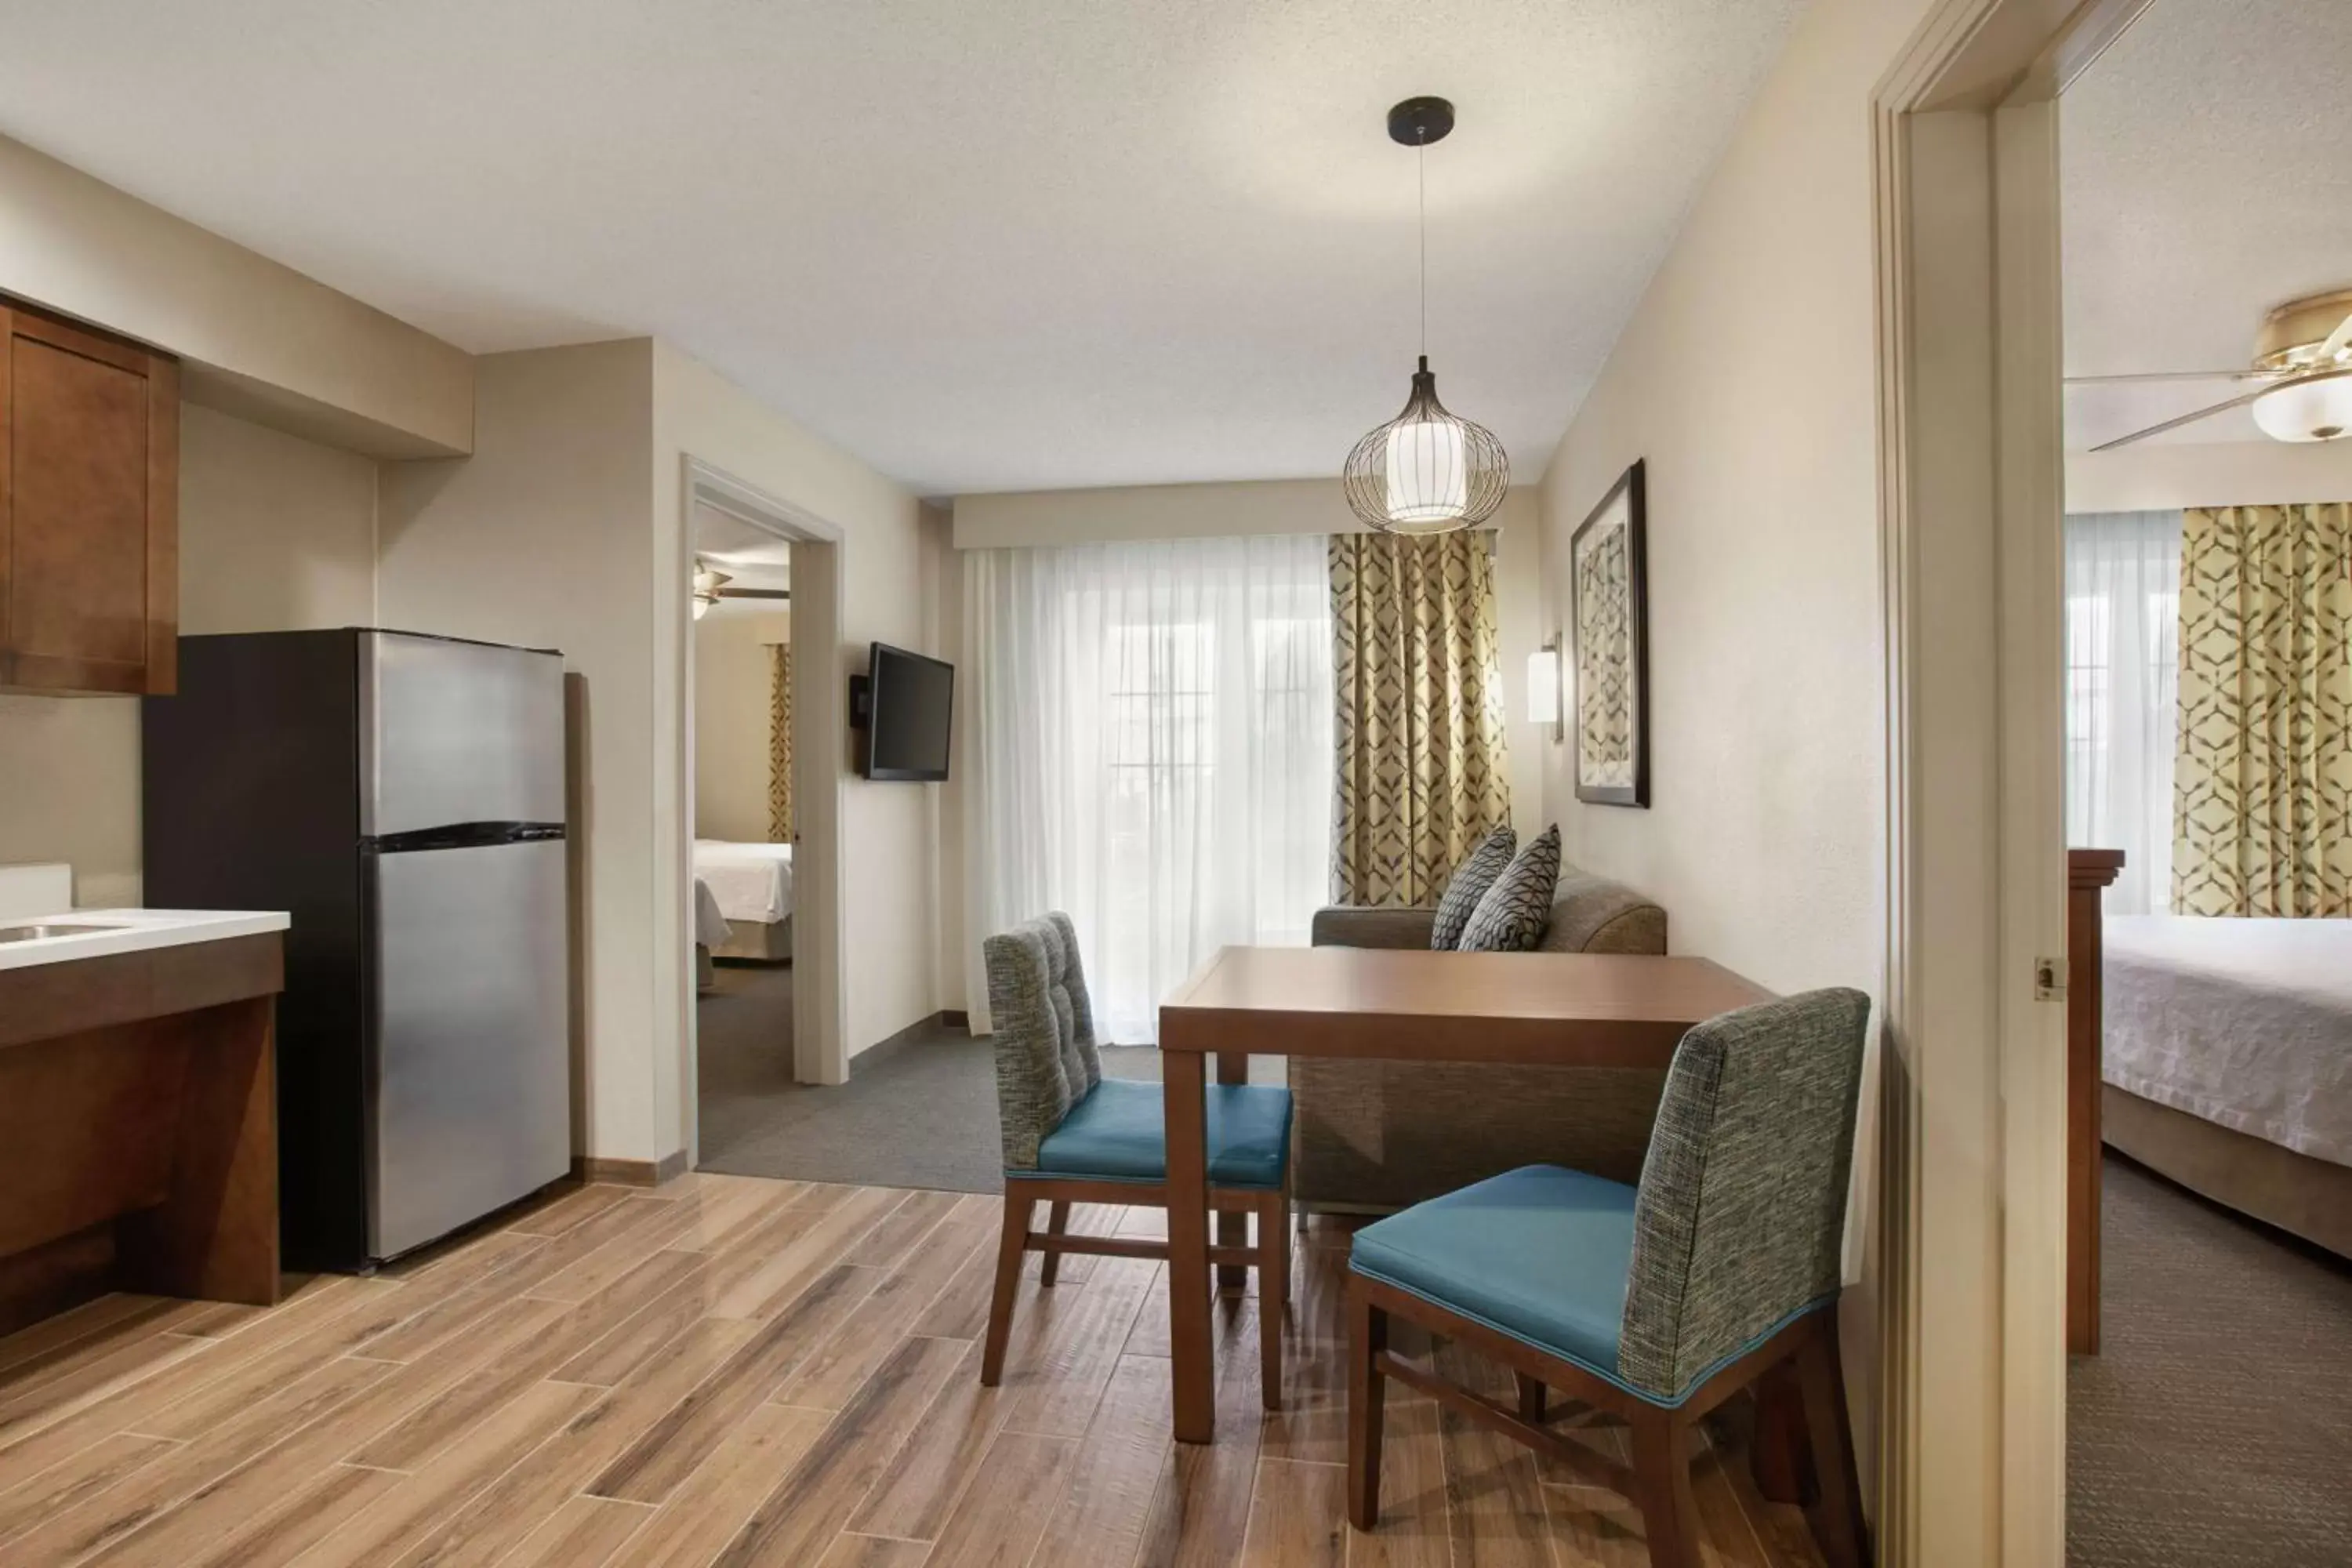 Bedroom, Dining Area in Homewood Suites by Hilton Kansas City Airport